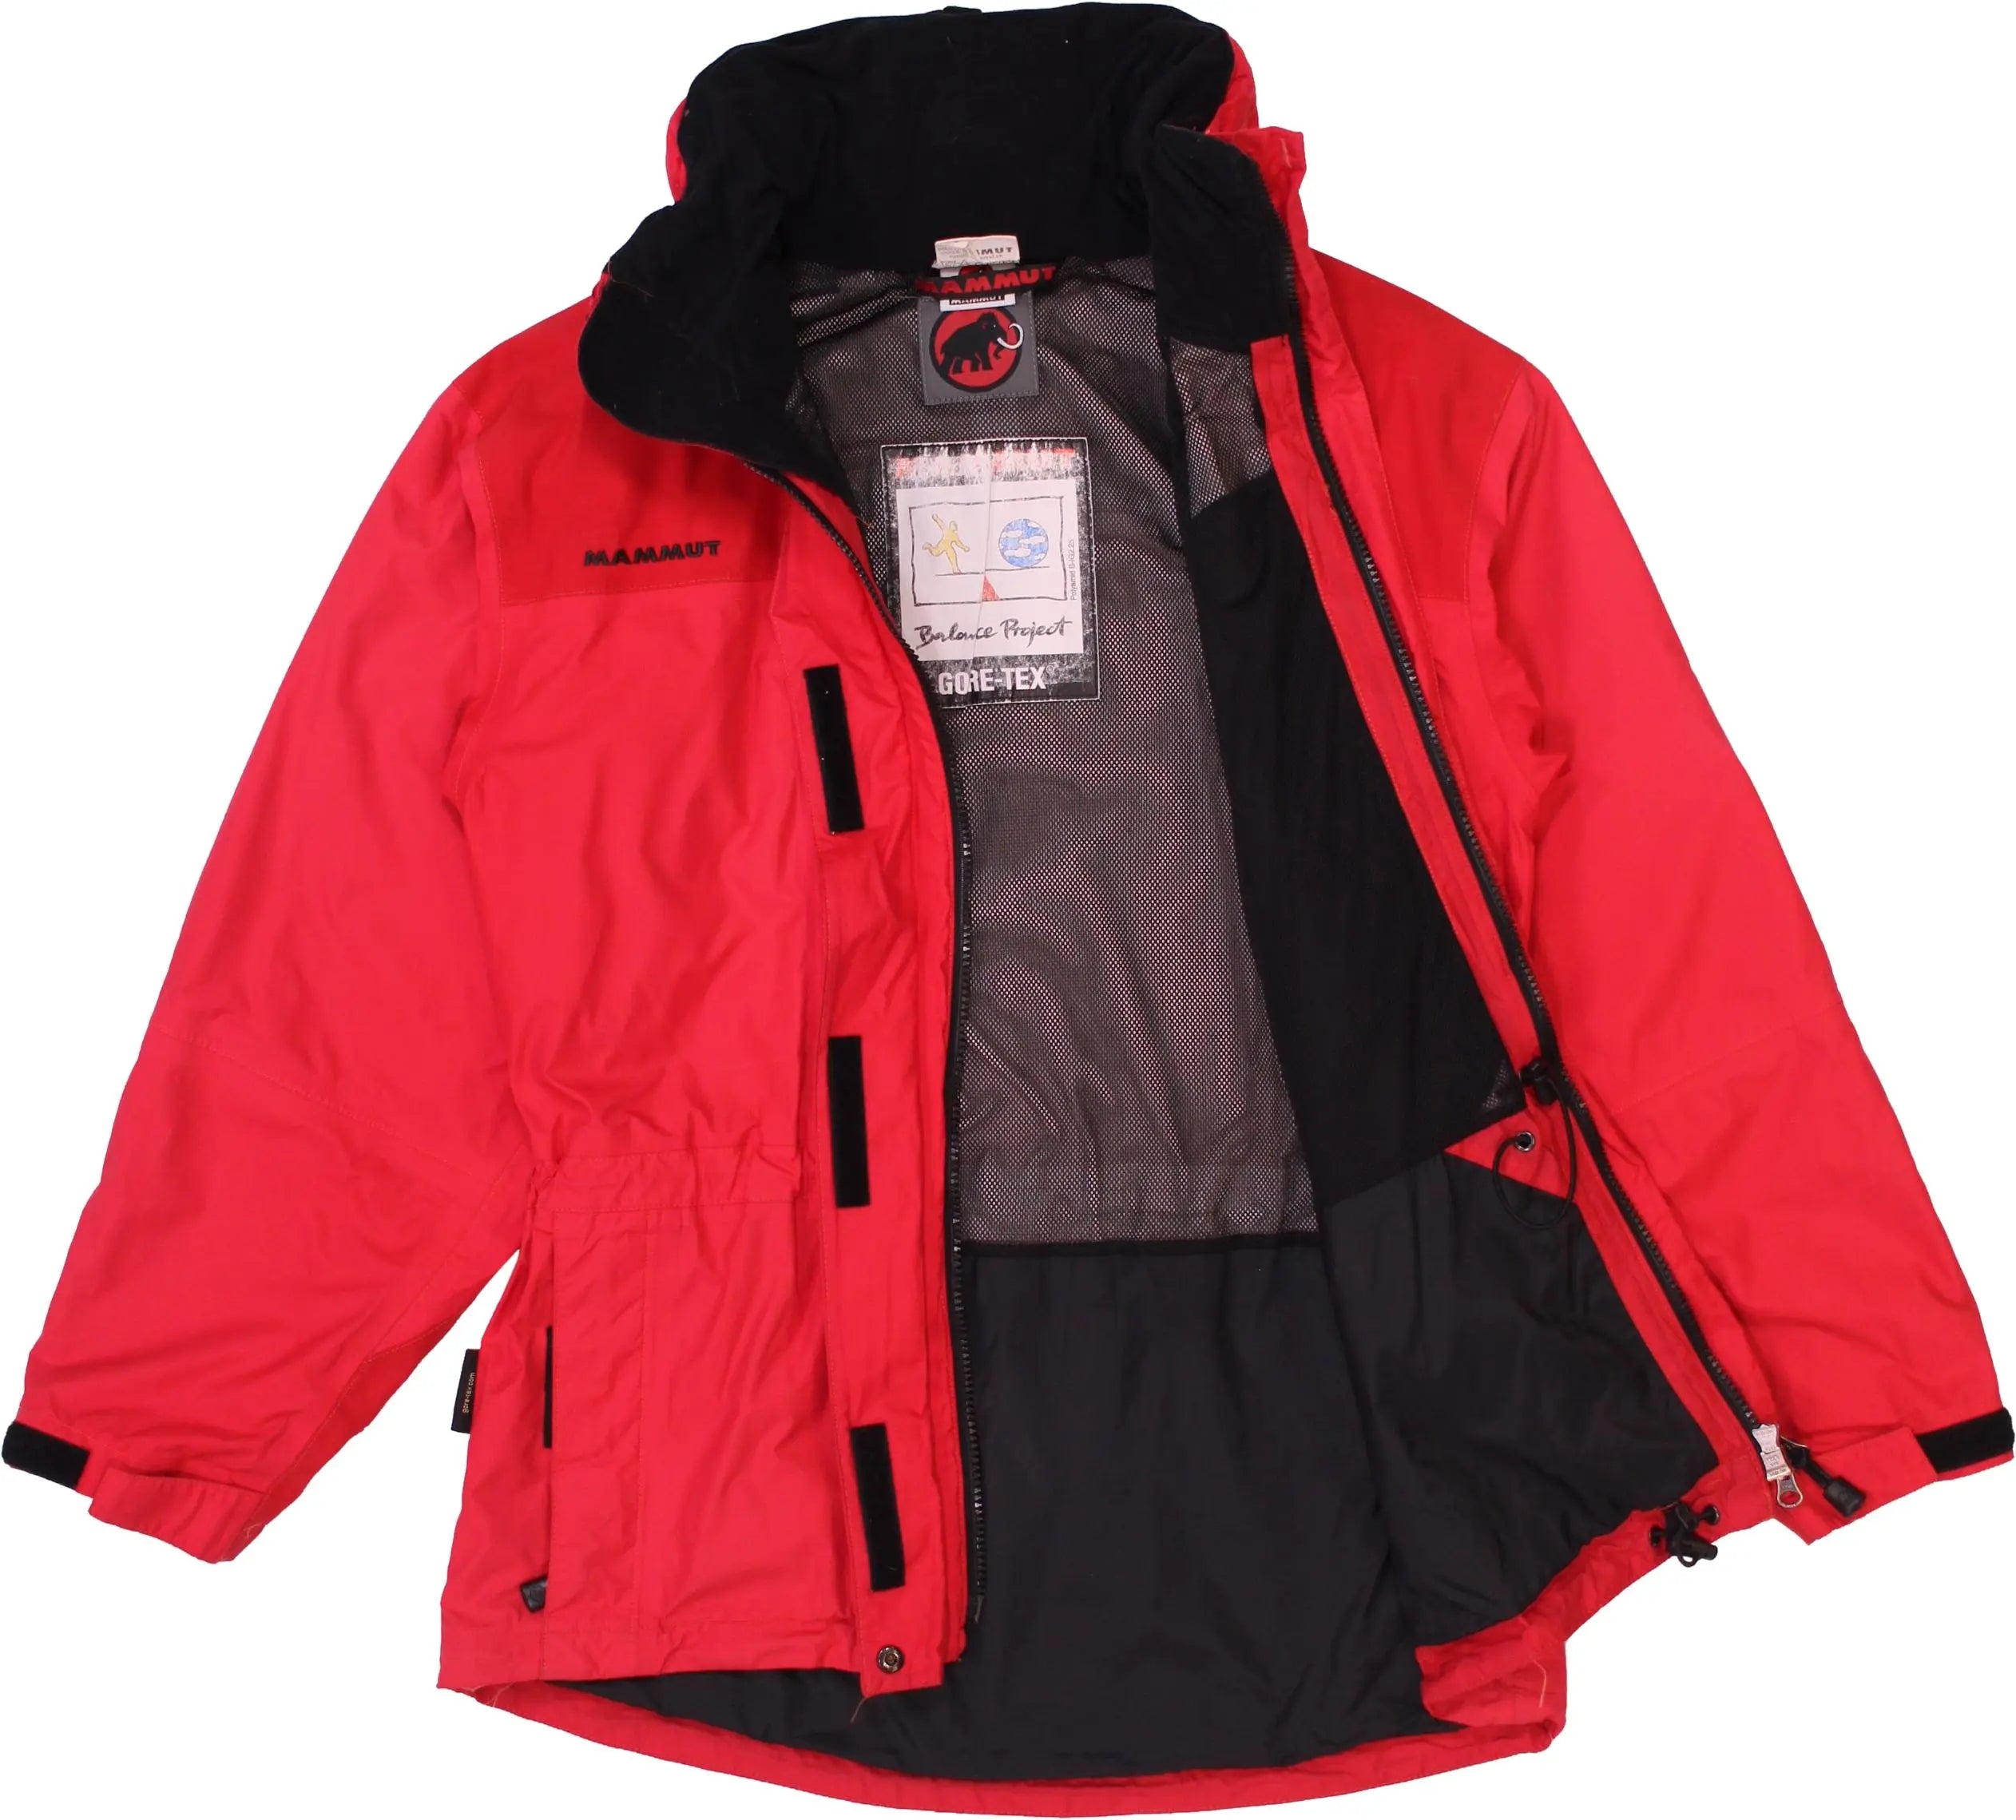 Mammut - Gore-Tex Jacket by Mammut- ThriftTale.com - Vintage and second handclothing